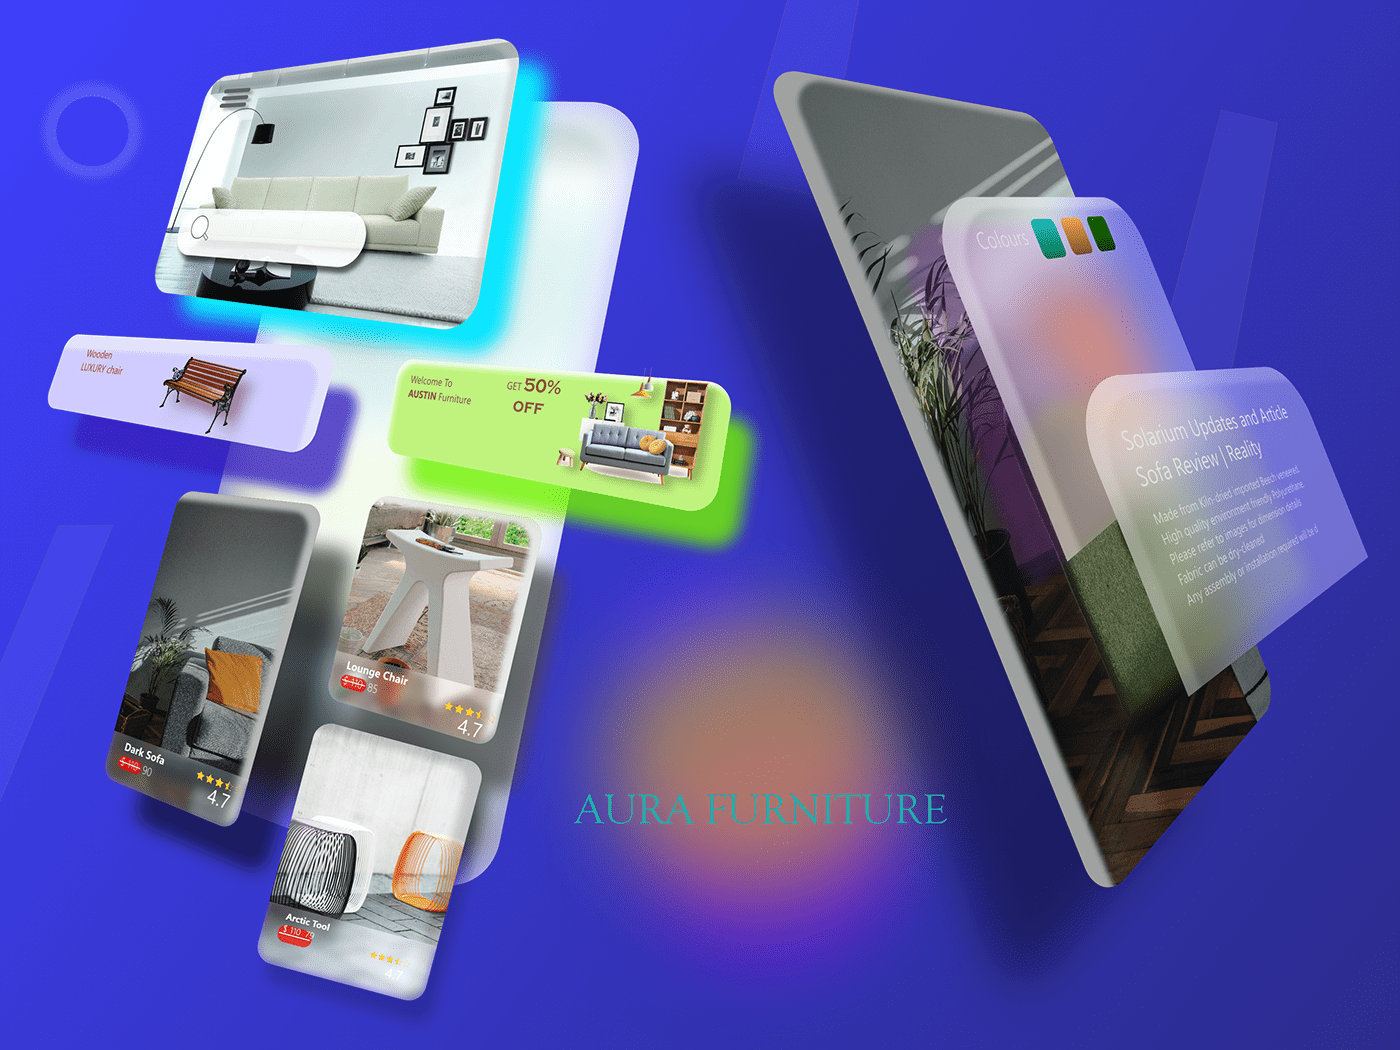 This is the 3D sample Furniture mobile application made for a client. The project inhace the quality